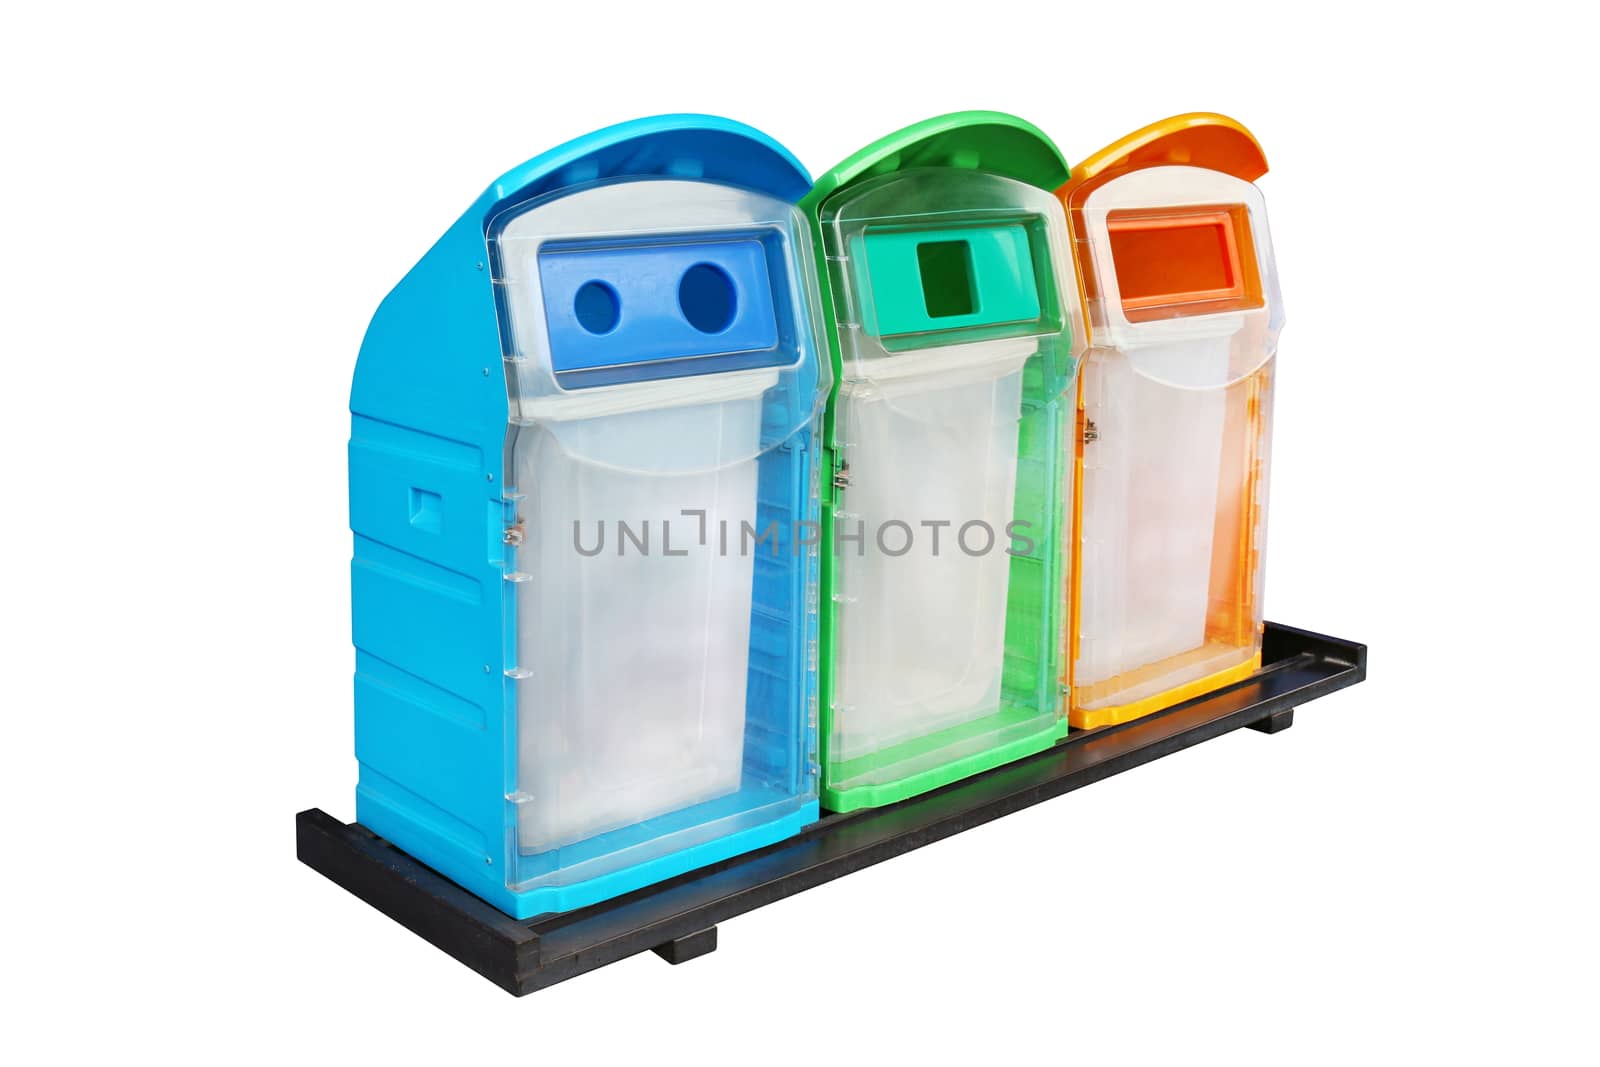 Waste Bin, Three colorful recycle bins plastic waste, Multicolored Garbage Trash Bins, Recycling Bin, Garbage Bin waste isolated on white background by cgdeaw